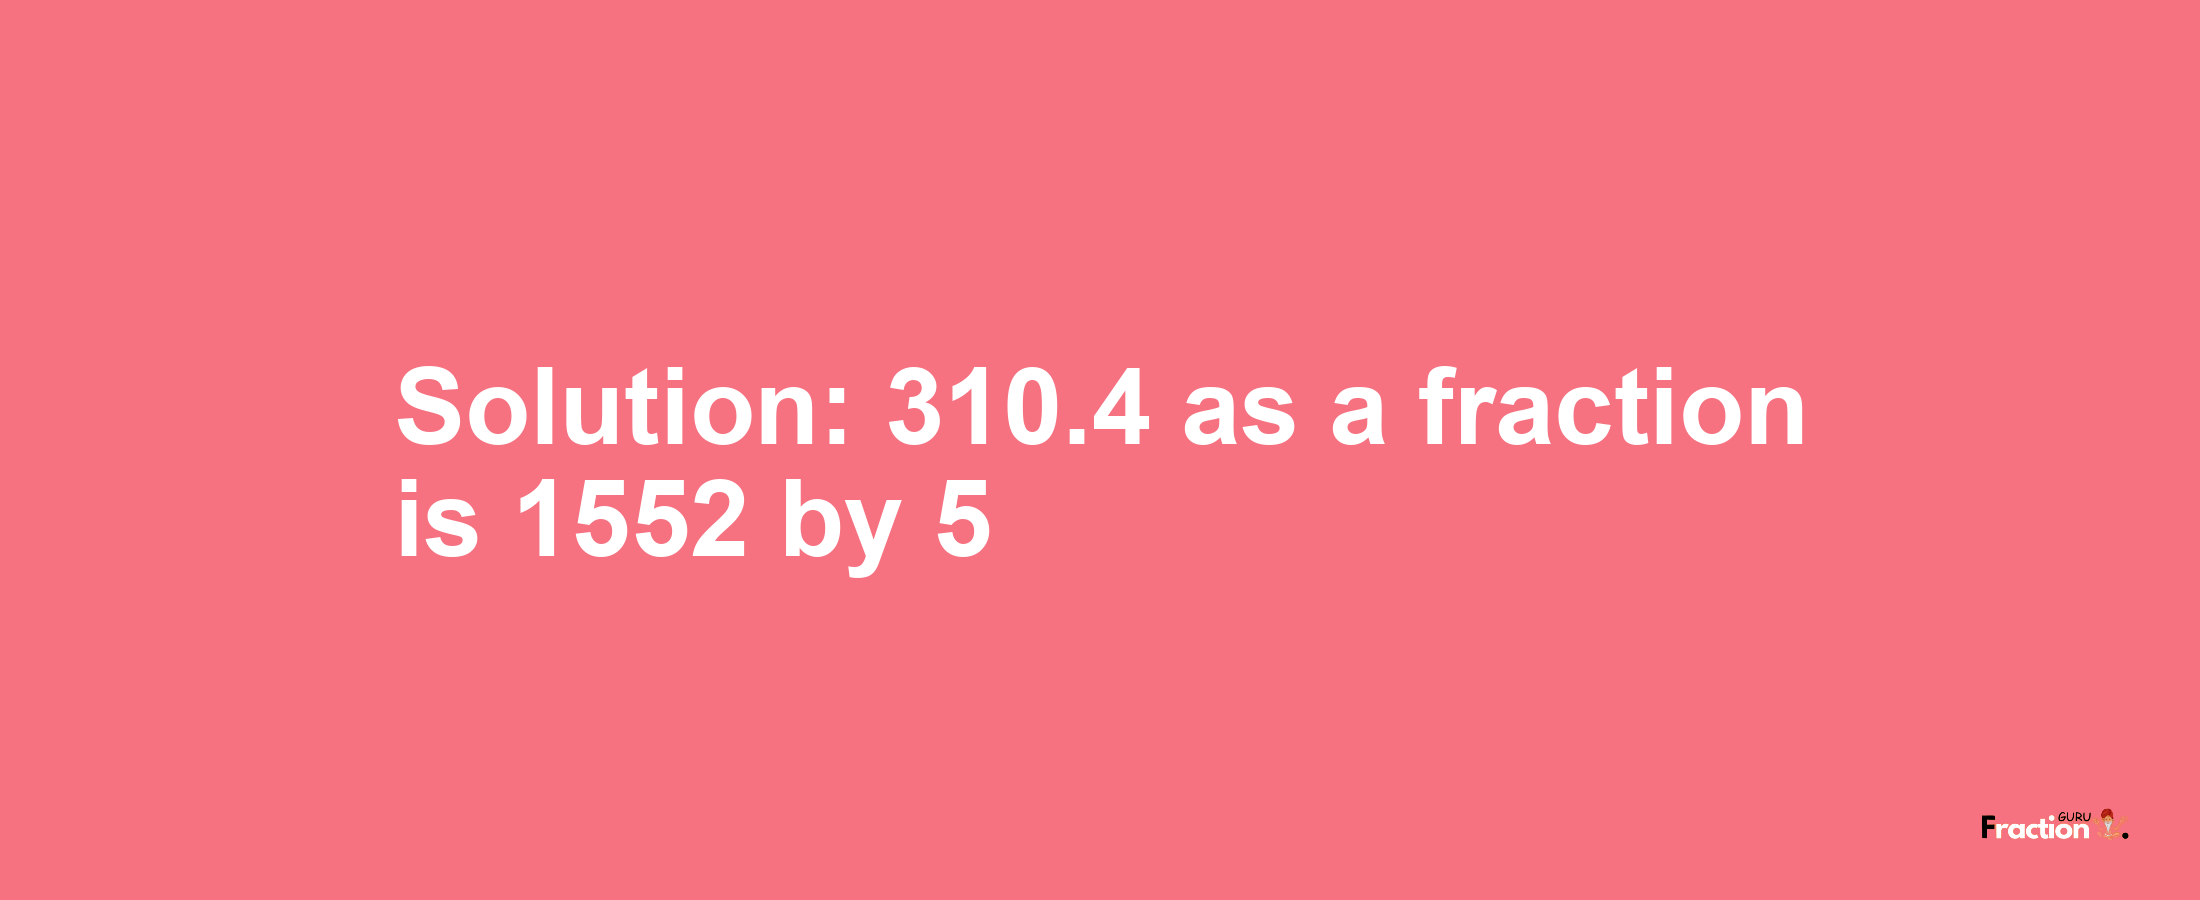 Solution:310.4 as a fraction is 1552/5